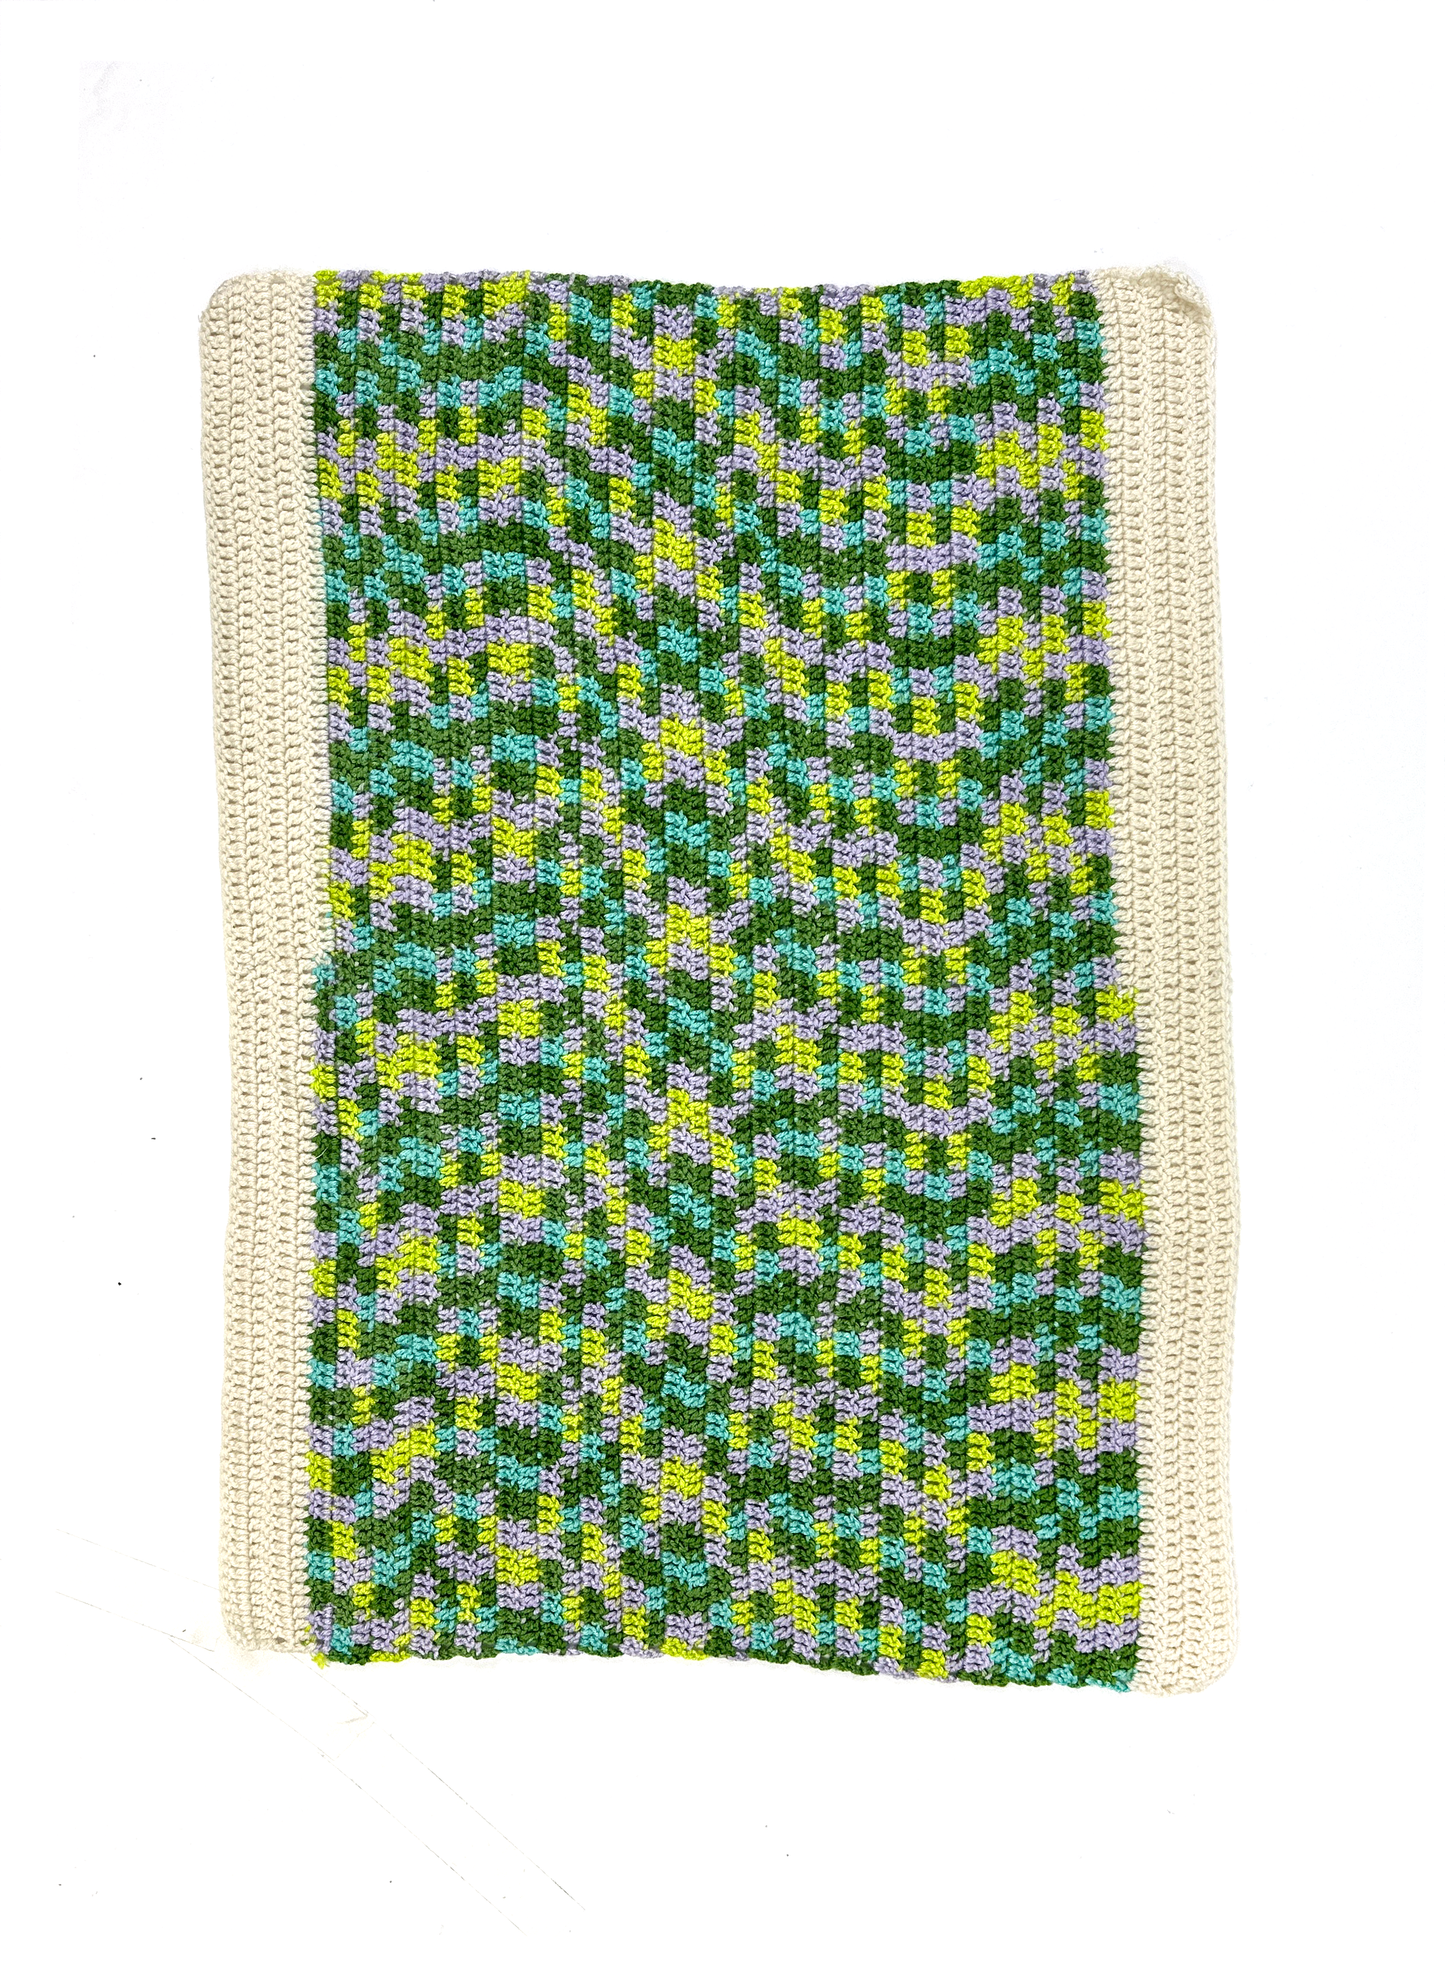 Vintage Lavender and Green Crocheted Blankie